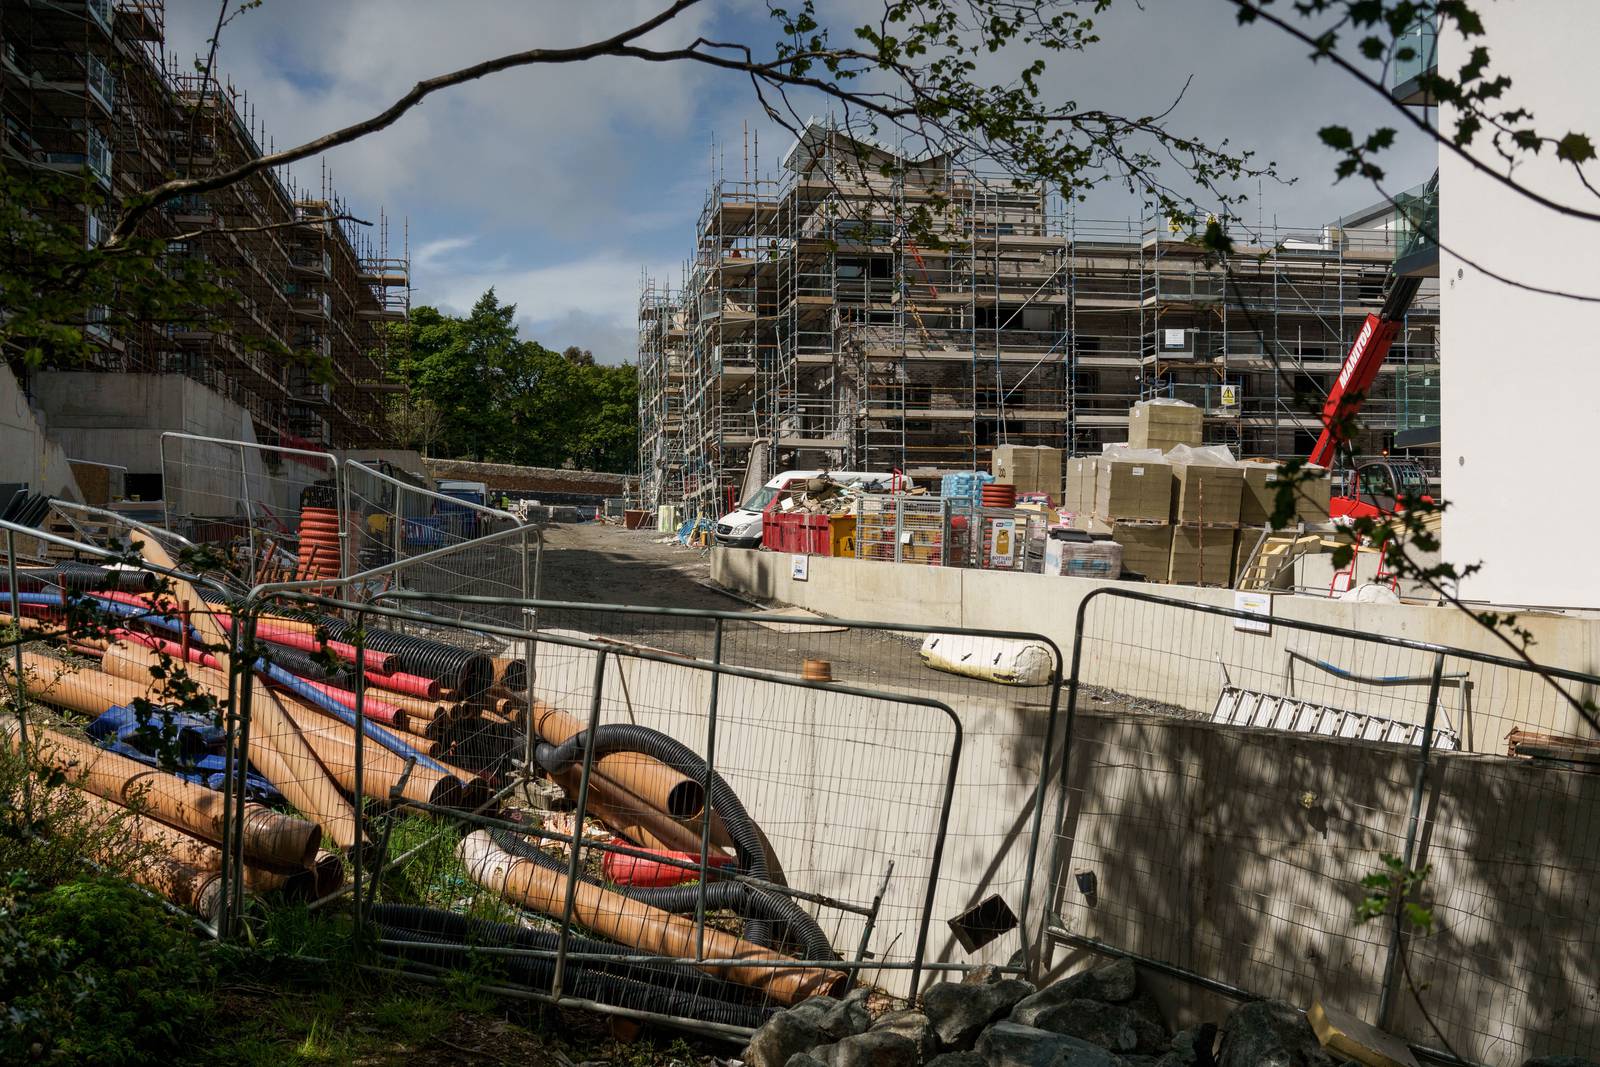 Scaffolding on a residential construction site in the Sandyford district of Dublin, Ireland, on Monday, May 10, 2021. The mass purchase of affordable houses  on the market for about 400,000 euros ($490,000)  set off a public firestorm and highlights the growing tension over the squeeze in urban housing and the role of large investors. Photographer: Paulo Nunes dos Santos/Bloomberg